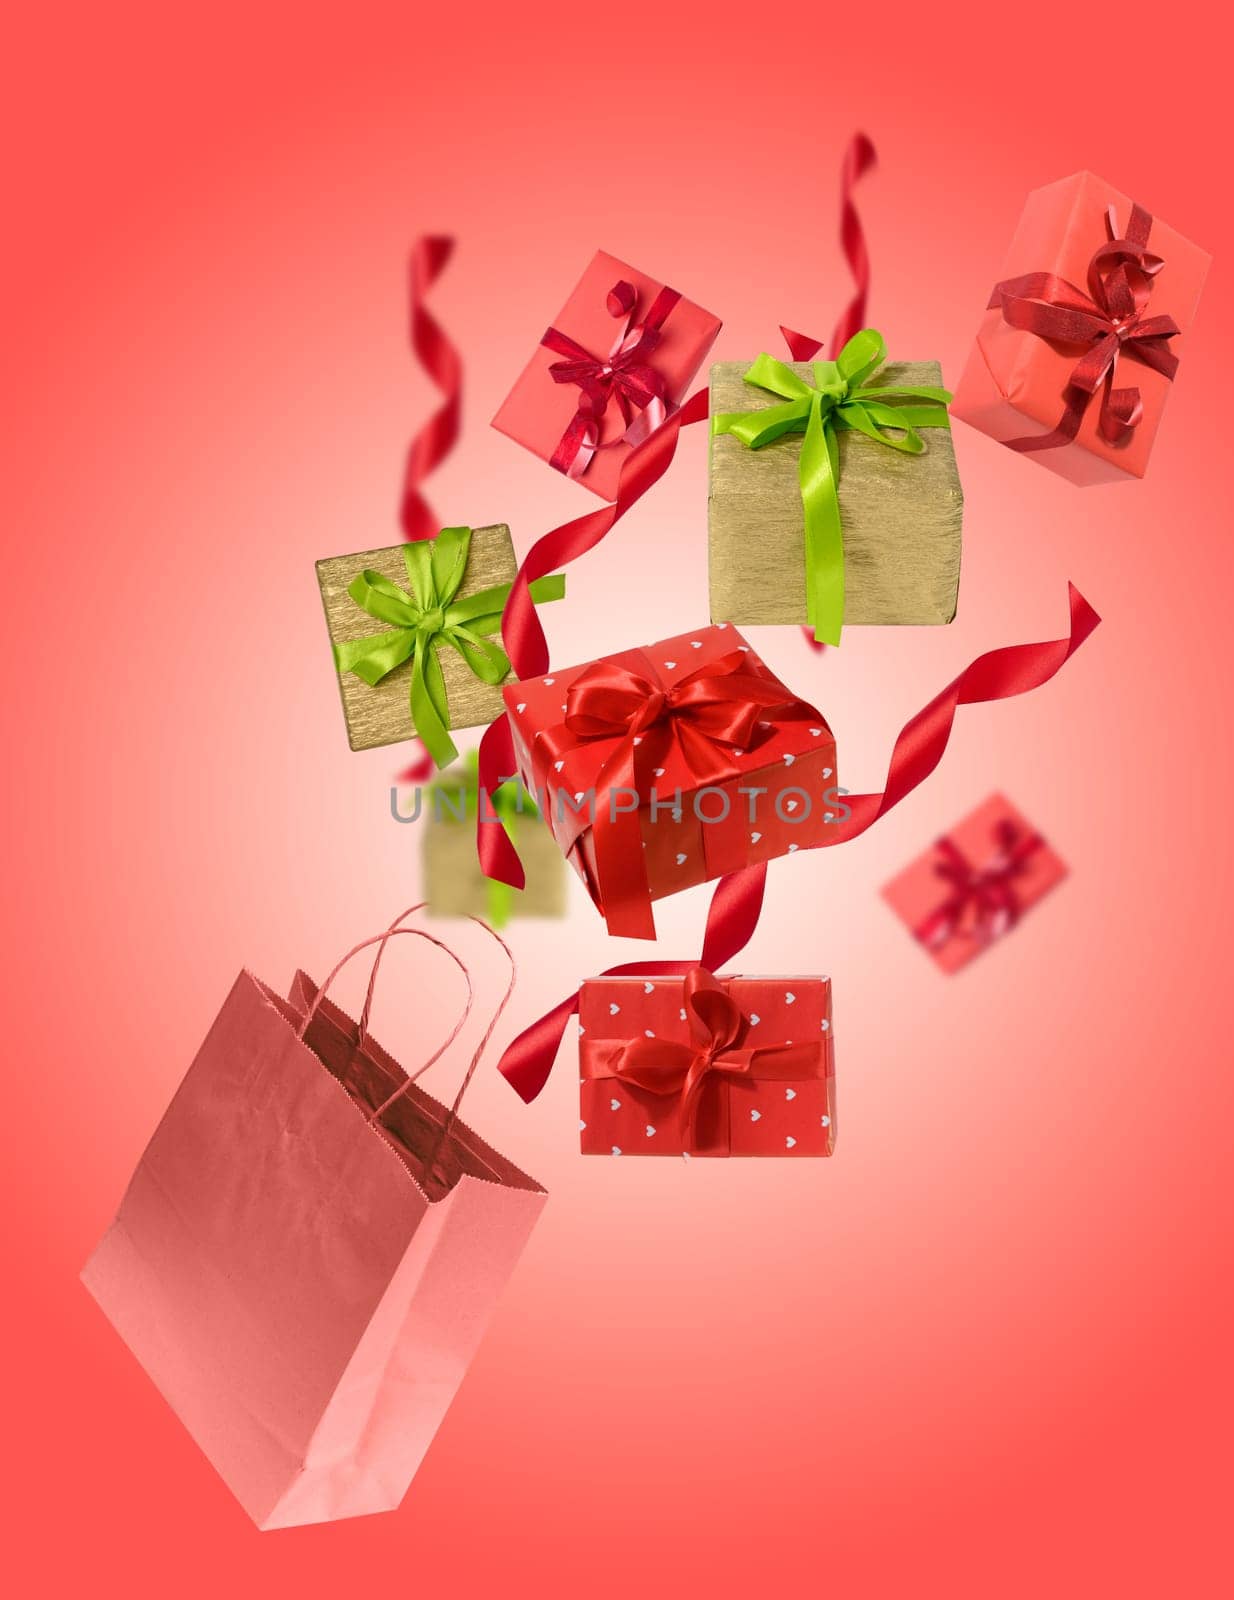 Levitating gifts in a craft bag on a red background, holiday